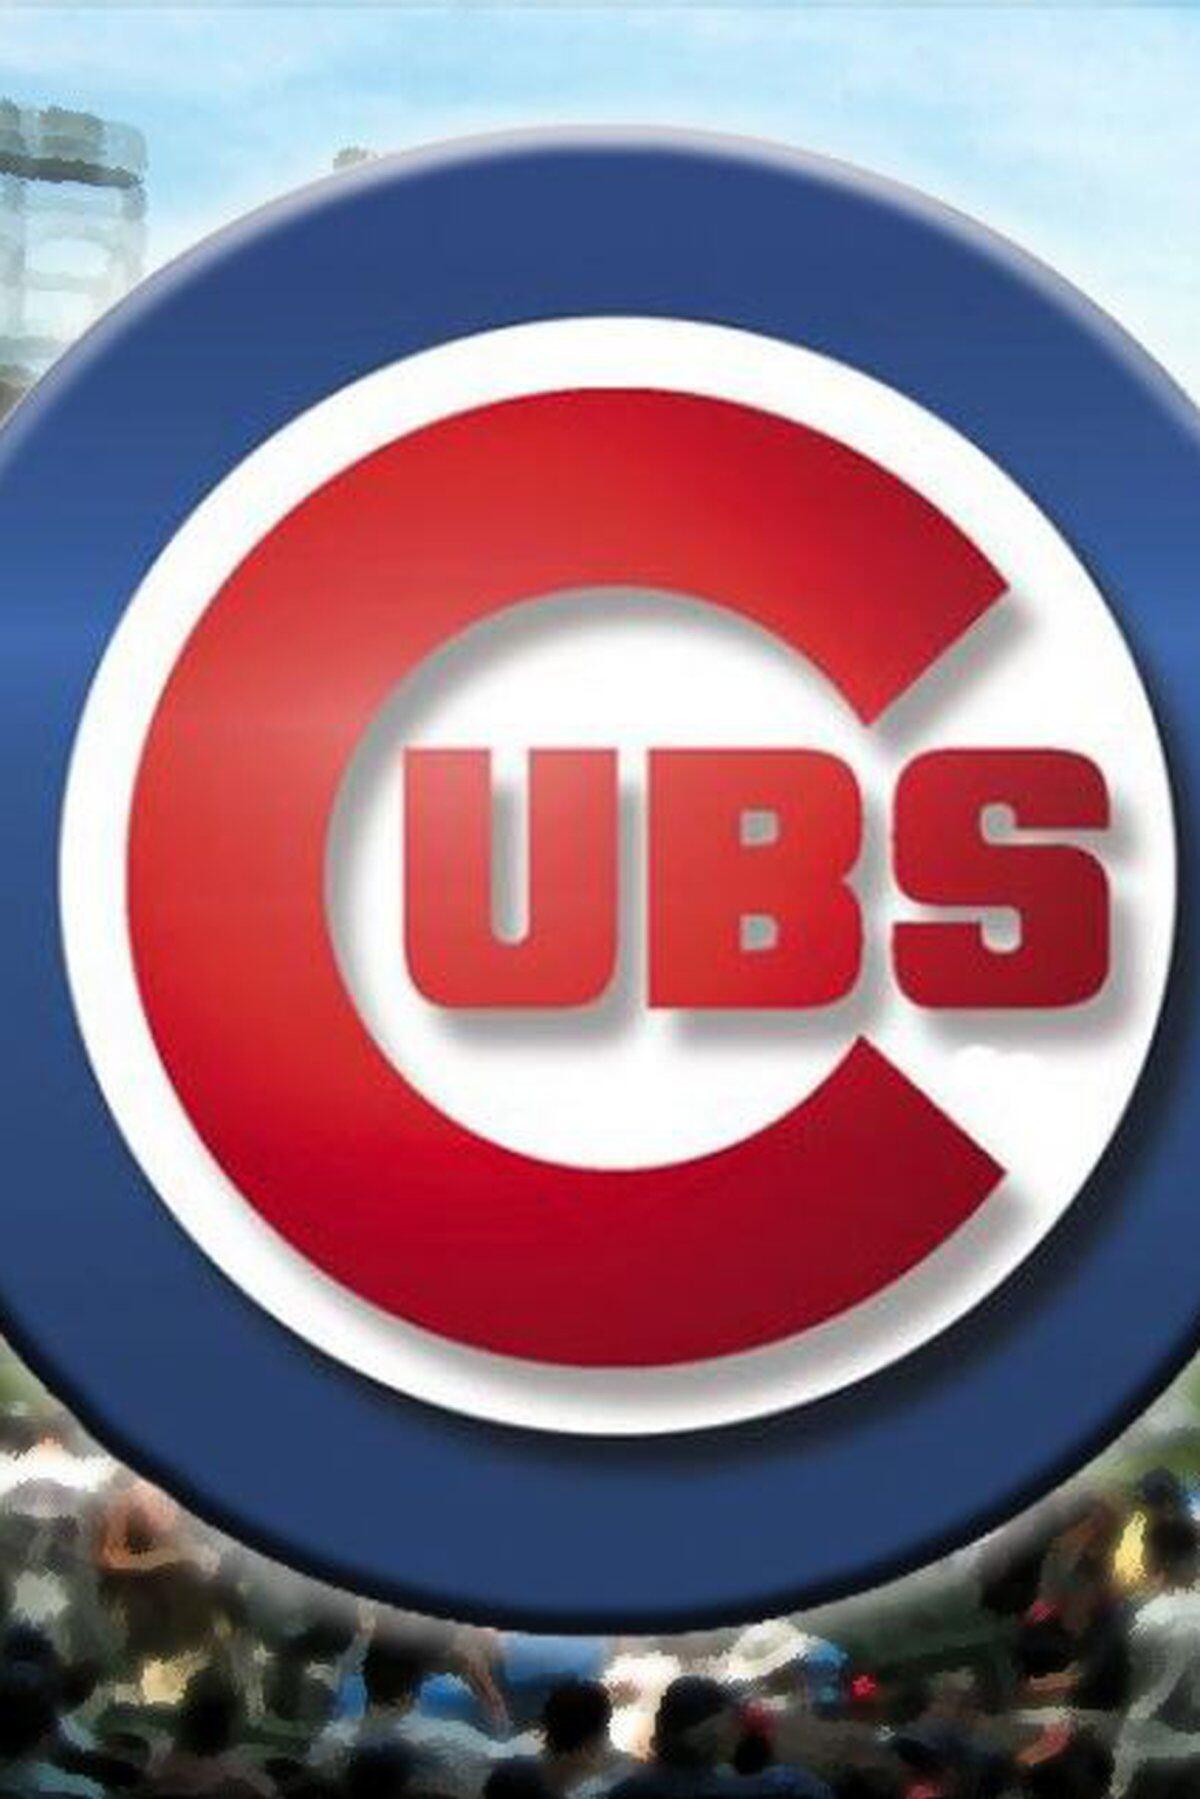 Cubs face the Reds following Hendricks strong performance